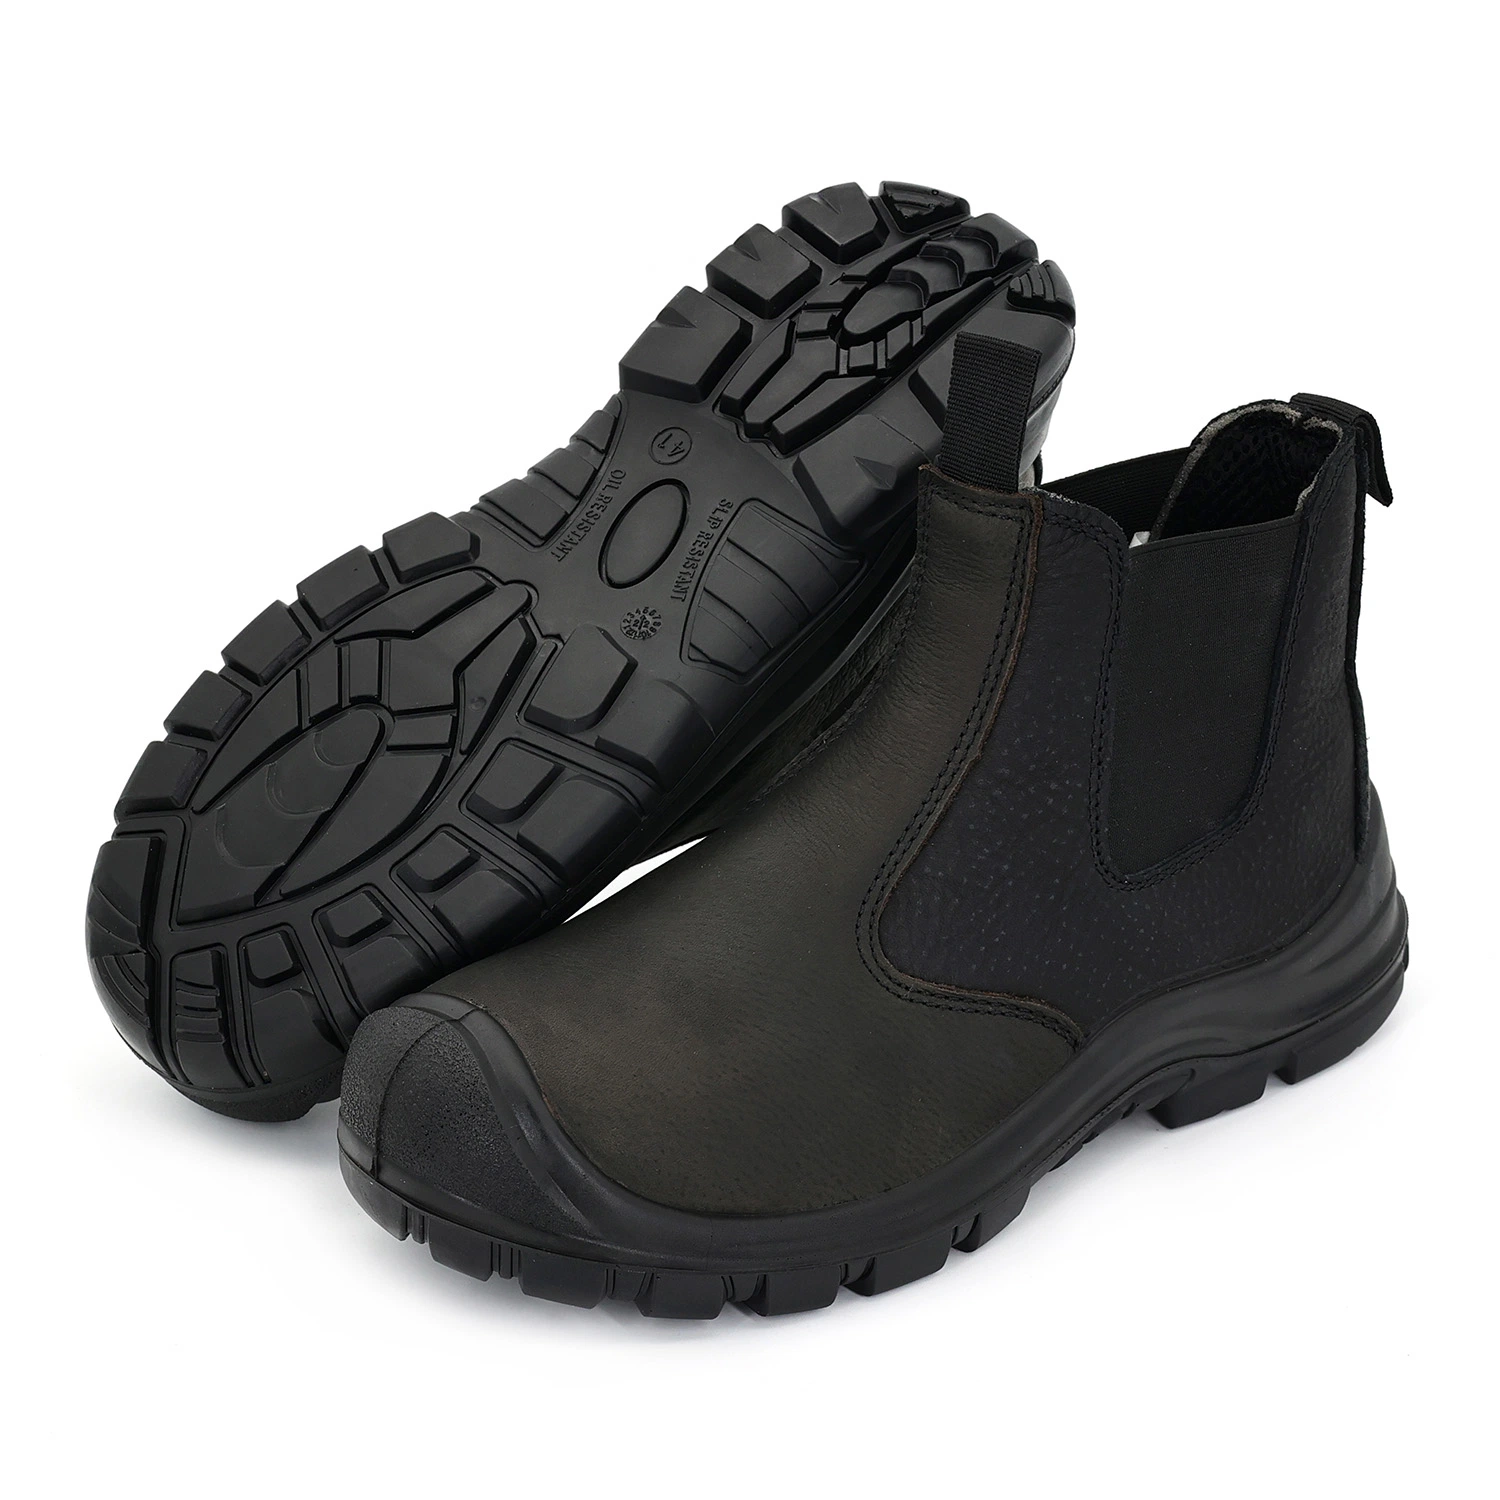 Steel Toe Cap and Steel Plate Chemical Resistant Safety Labor Shoes Safety Work Boots